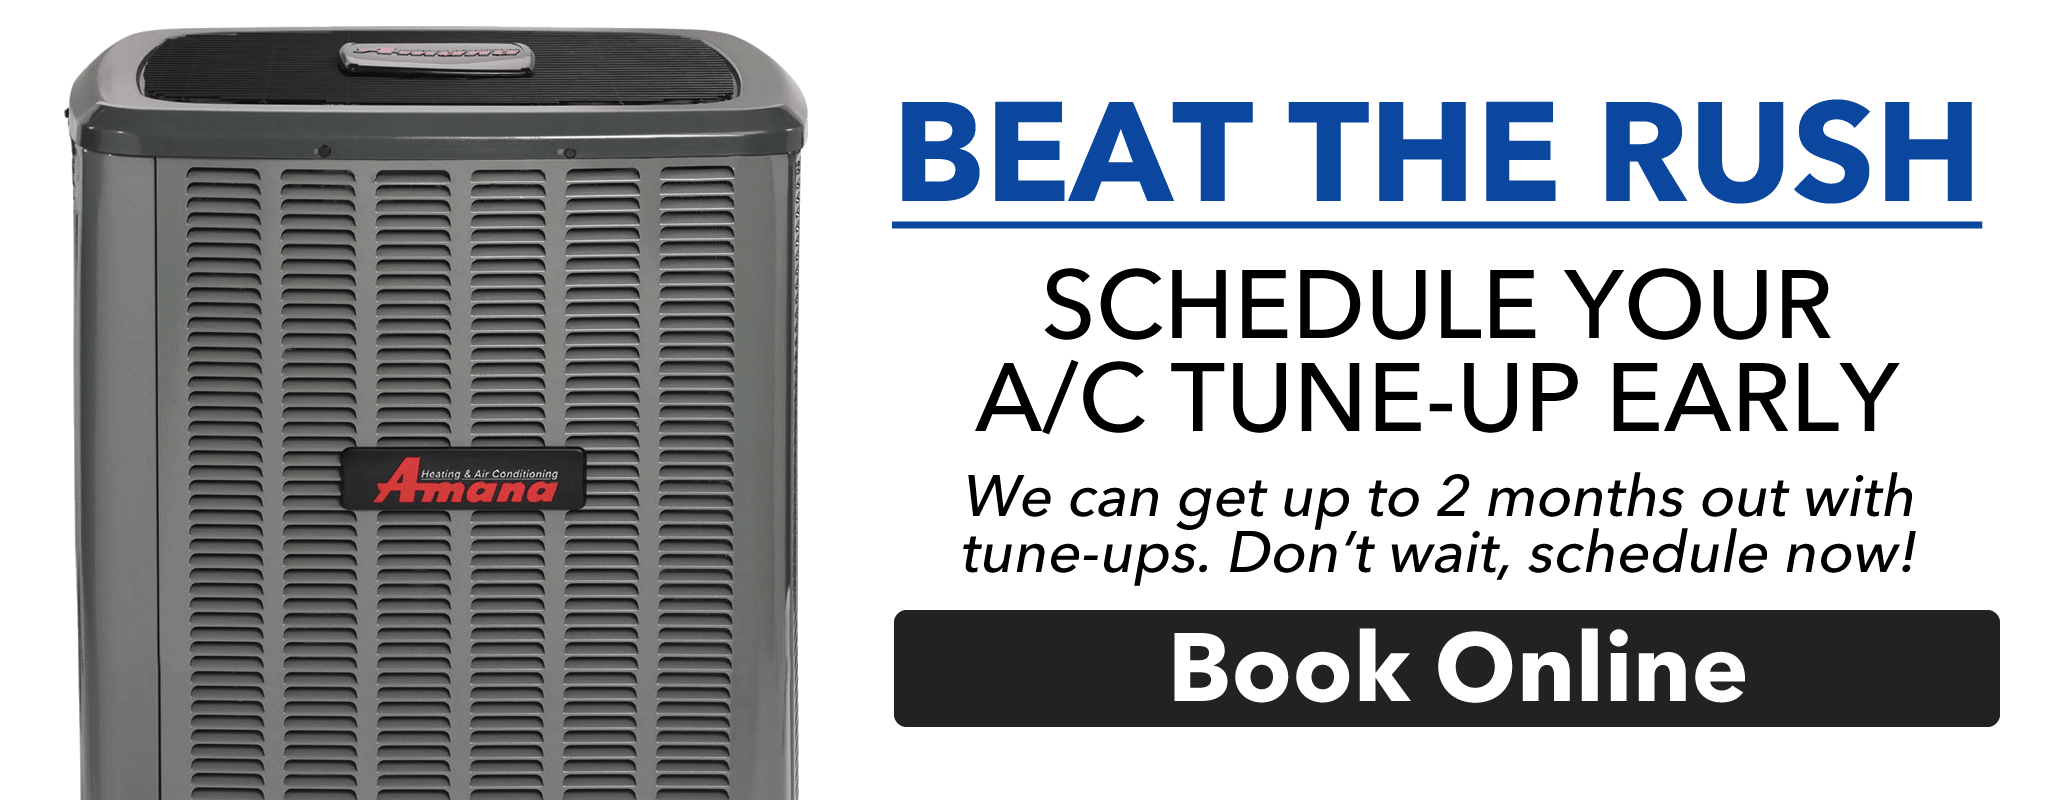 Beat the rush, get your AC tune-up scheduled before the rush. Don't wait up to 2 months for an appointment.